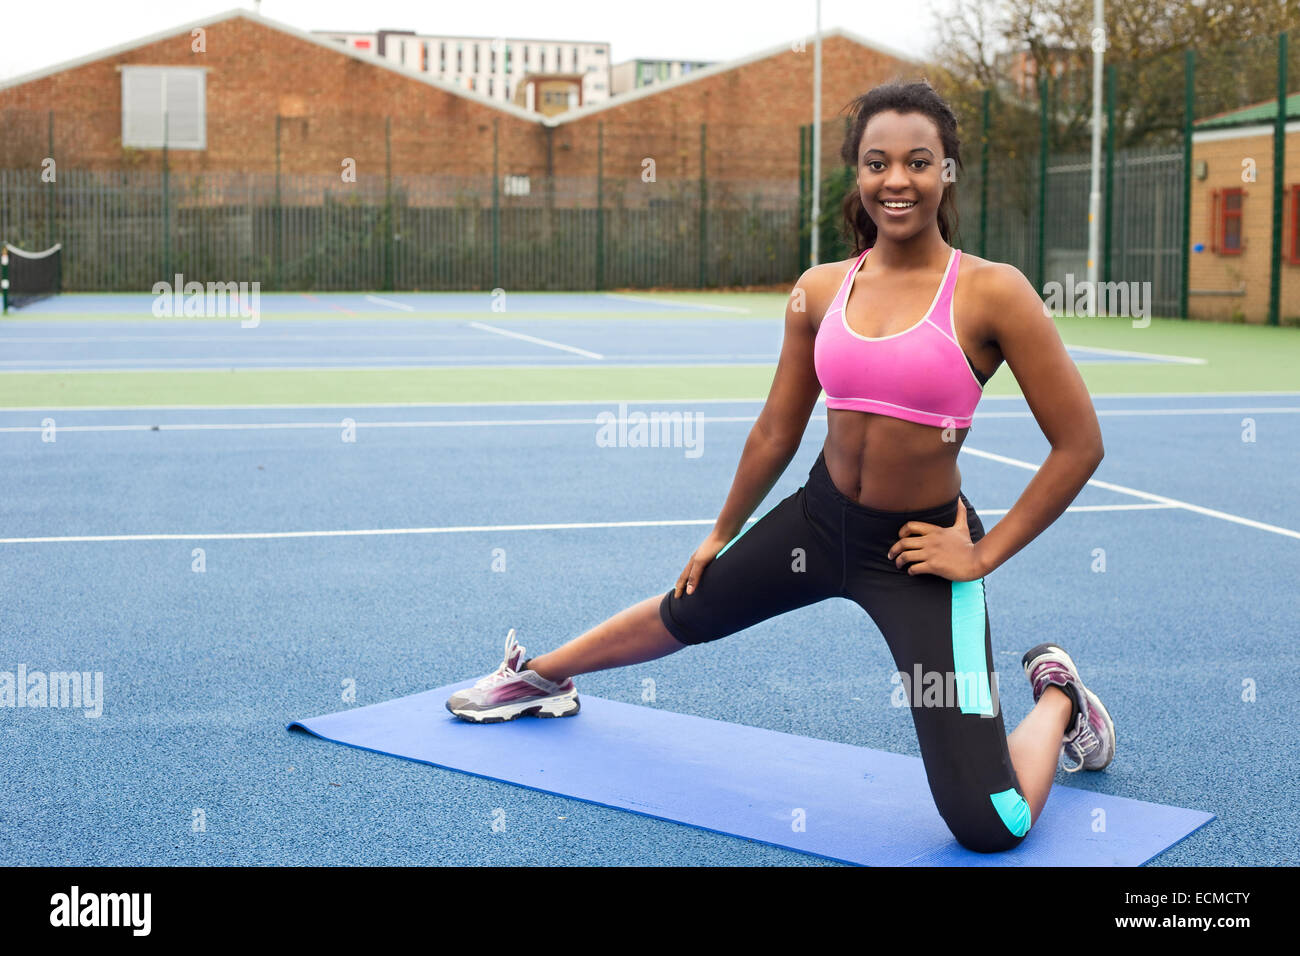 A Sporty Skinny Girl In A Black Workout Tight Suit Is Relaxing After Doing  Push-ups On The Blue Yoga Mat At Home. A Woman Is Practicing Exercises For  The Chest At Her